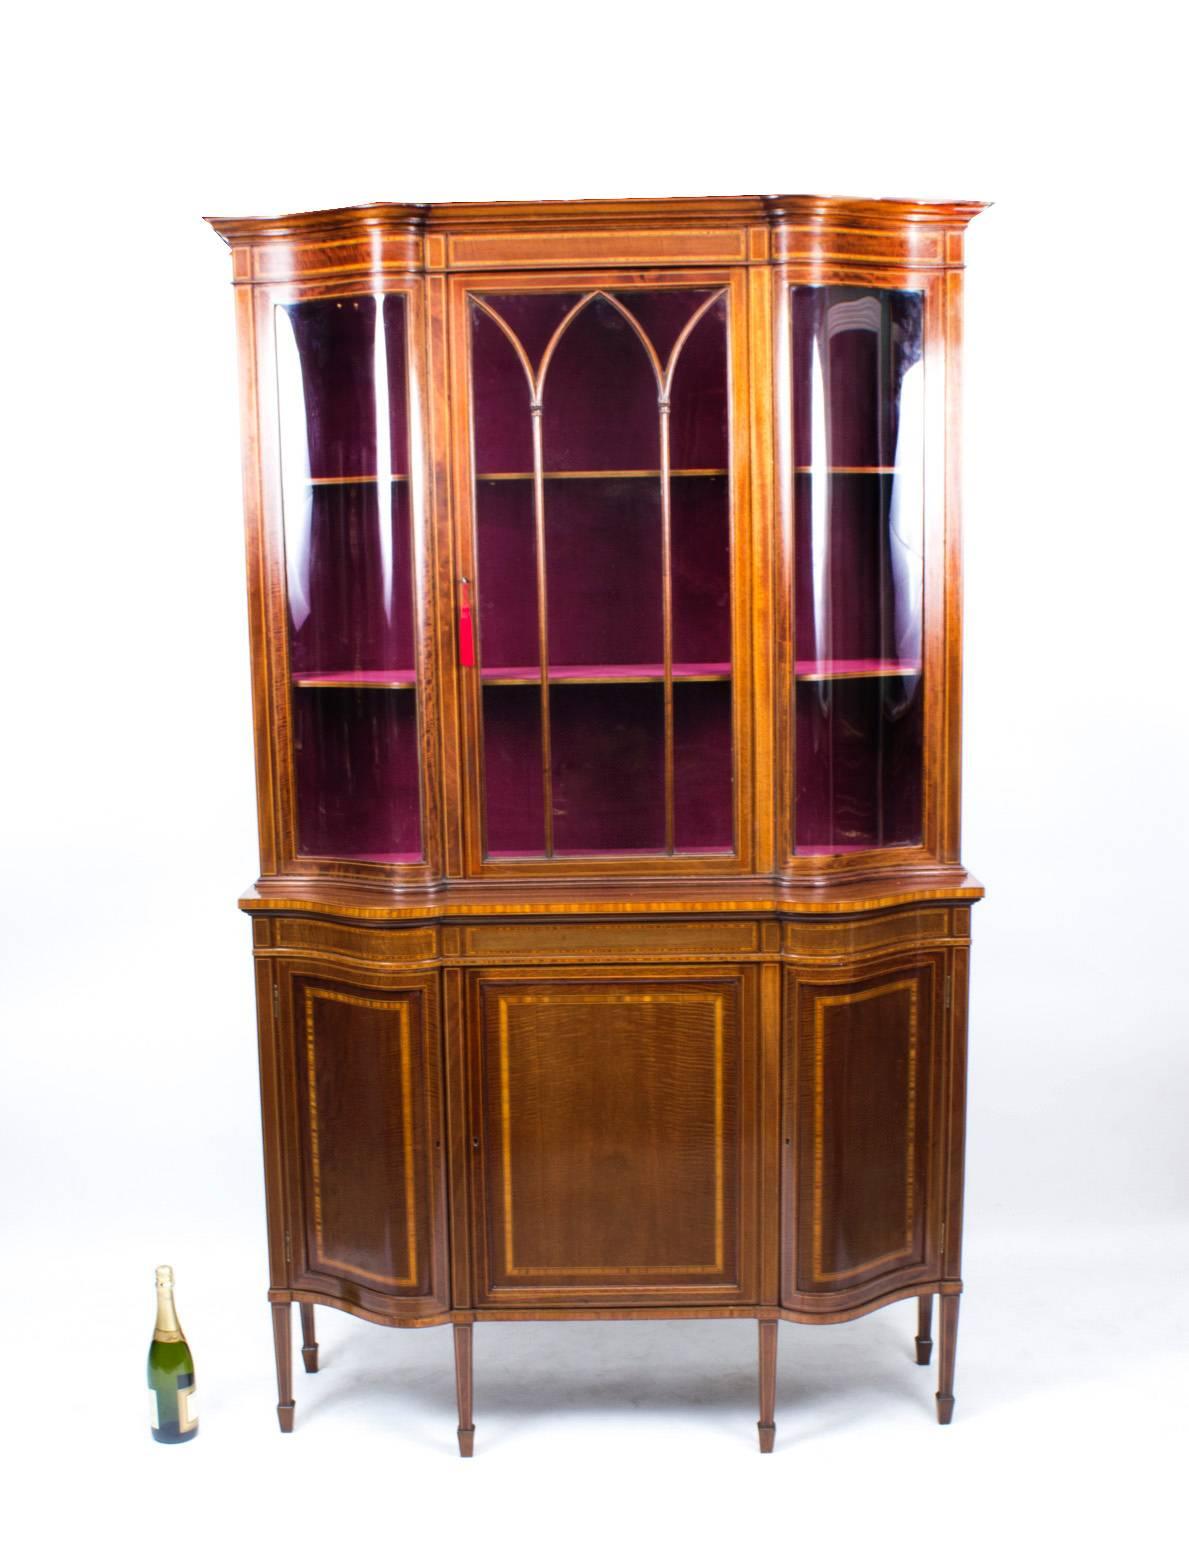 Antique Edwardian Serpentine Inlaid Display Cabinet Early 20th Century 3